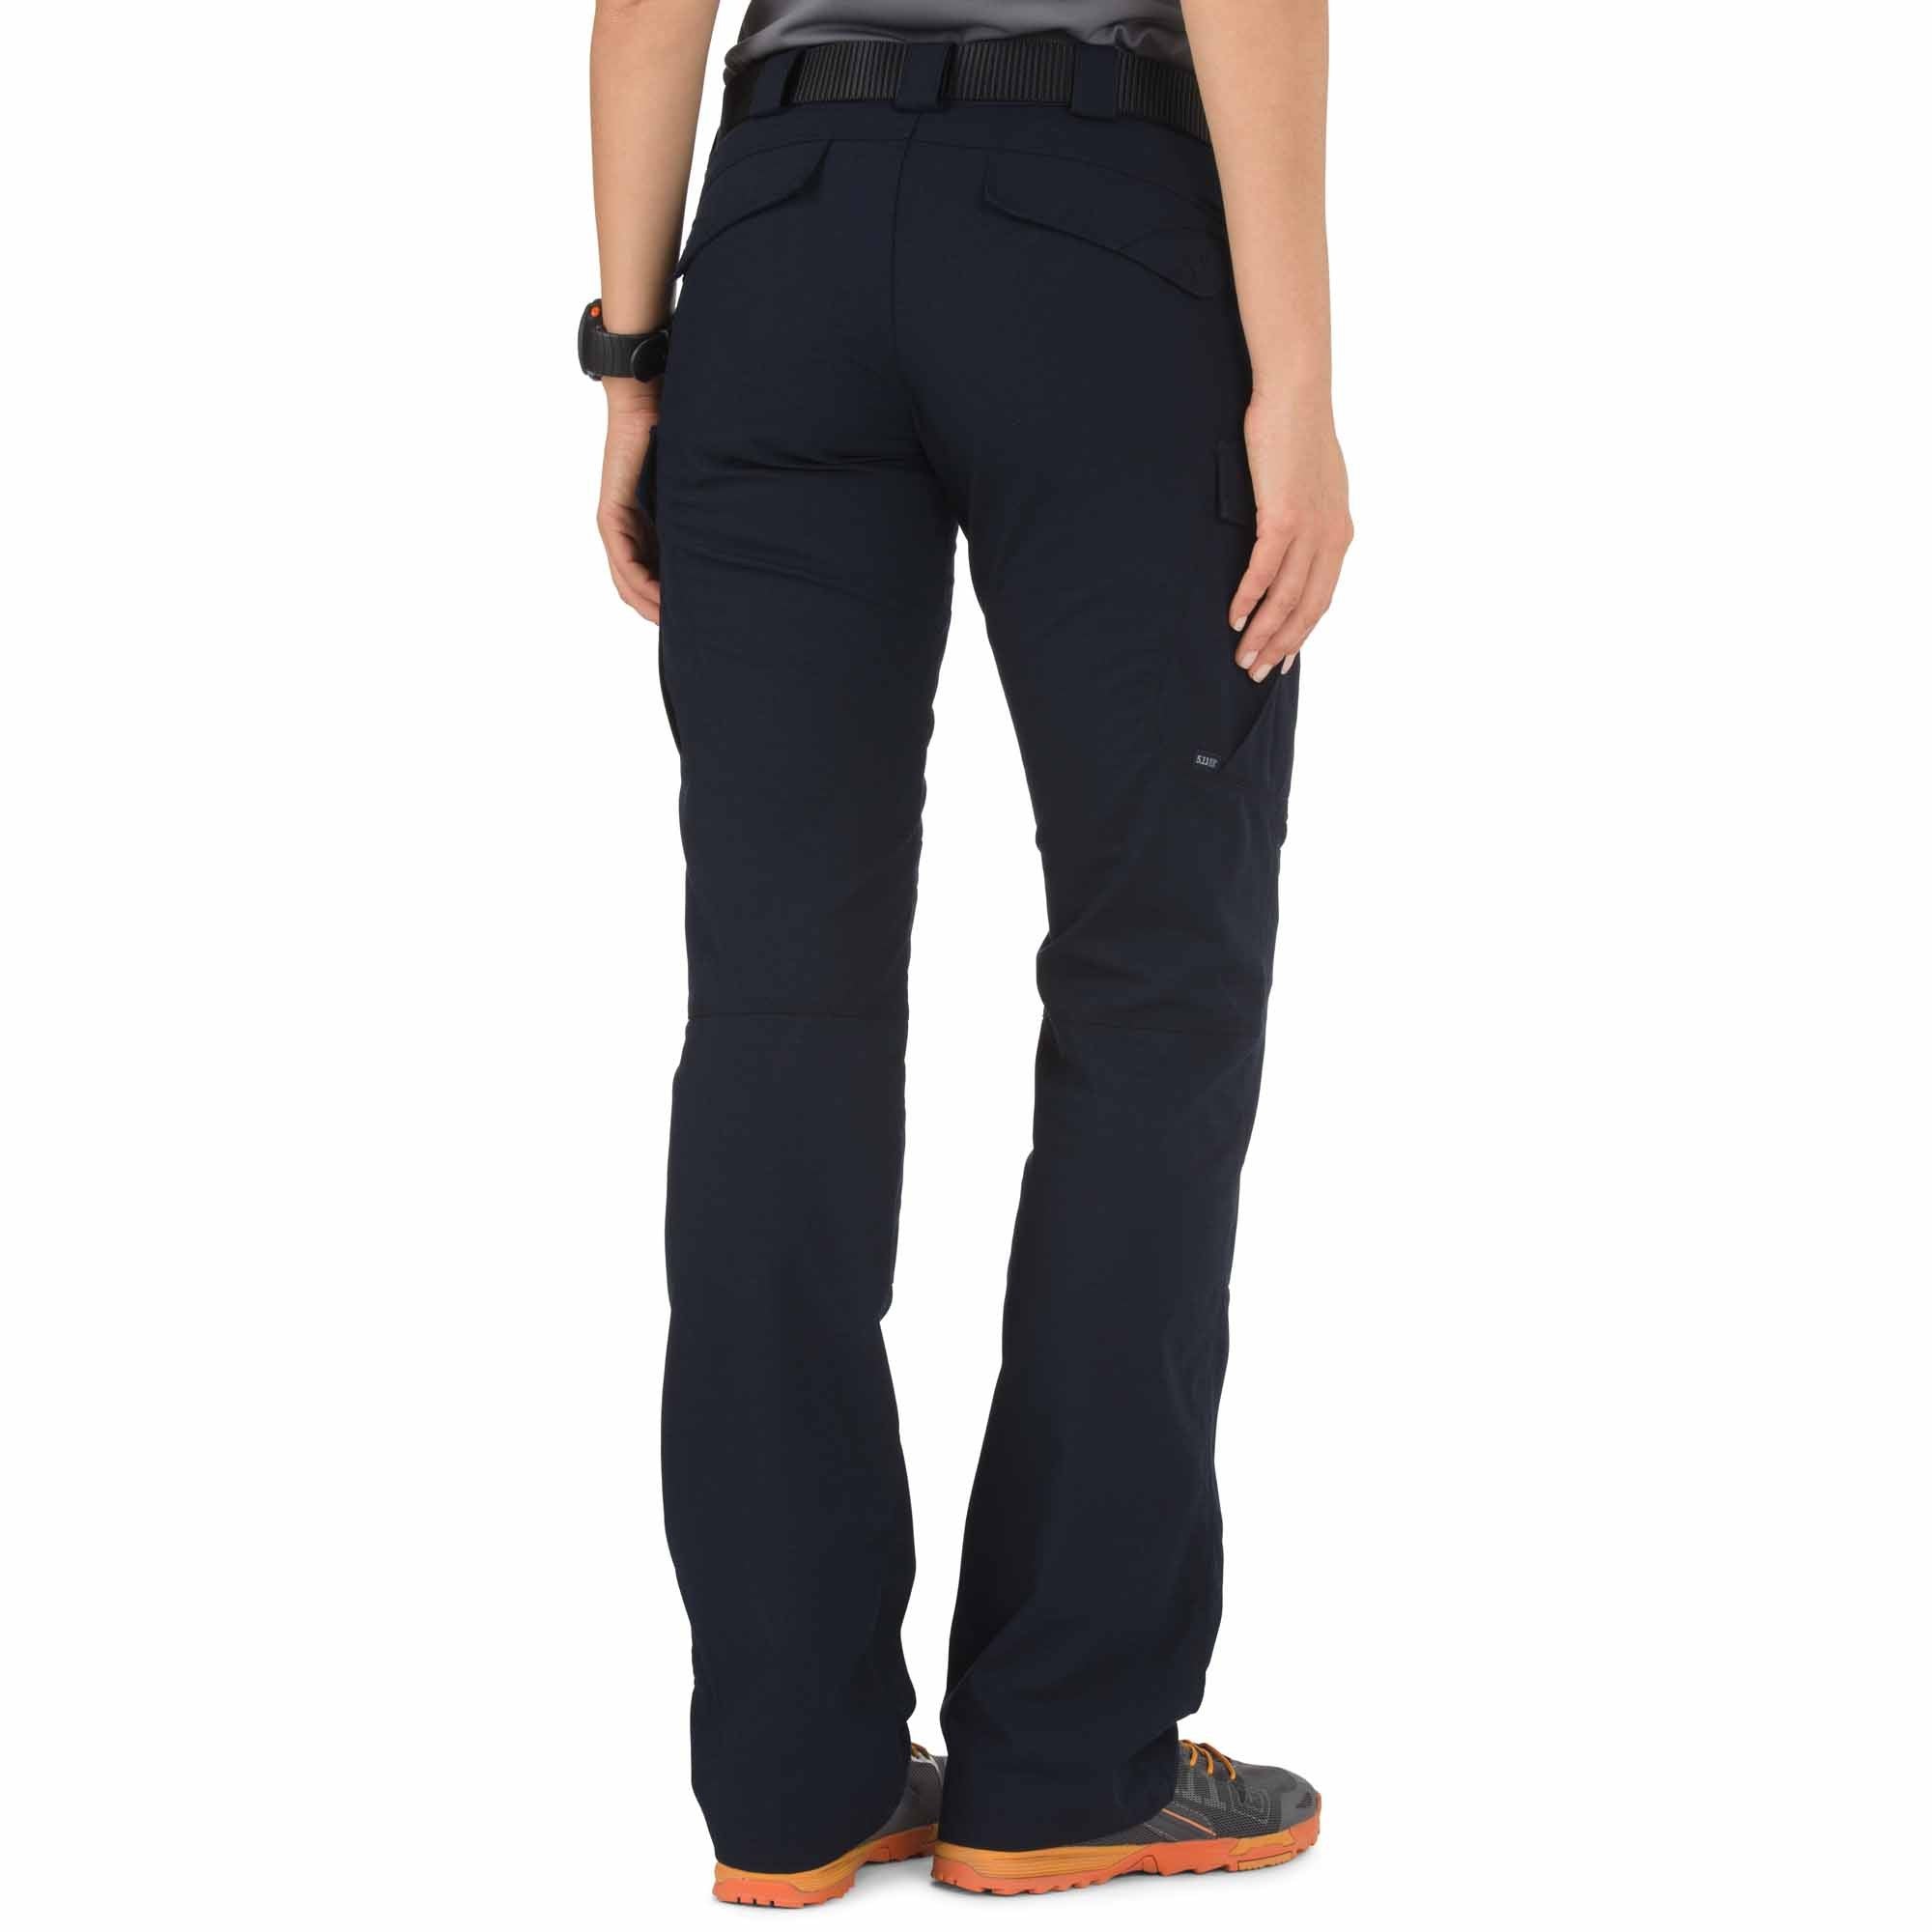 5.11 Tactical Women's Stryke Pants - EMPIRE TACTICAL Store